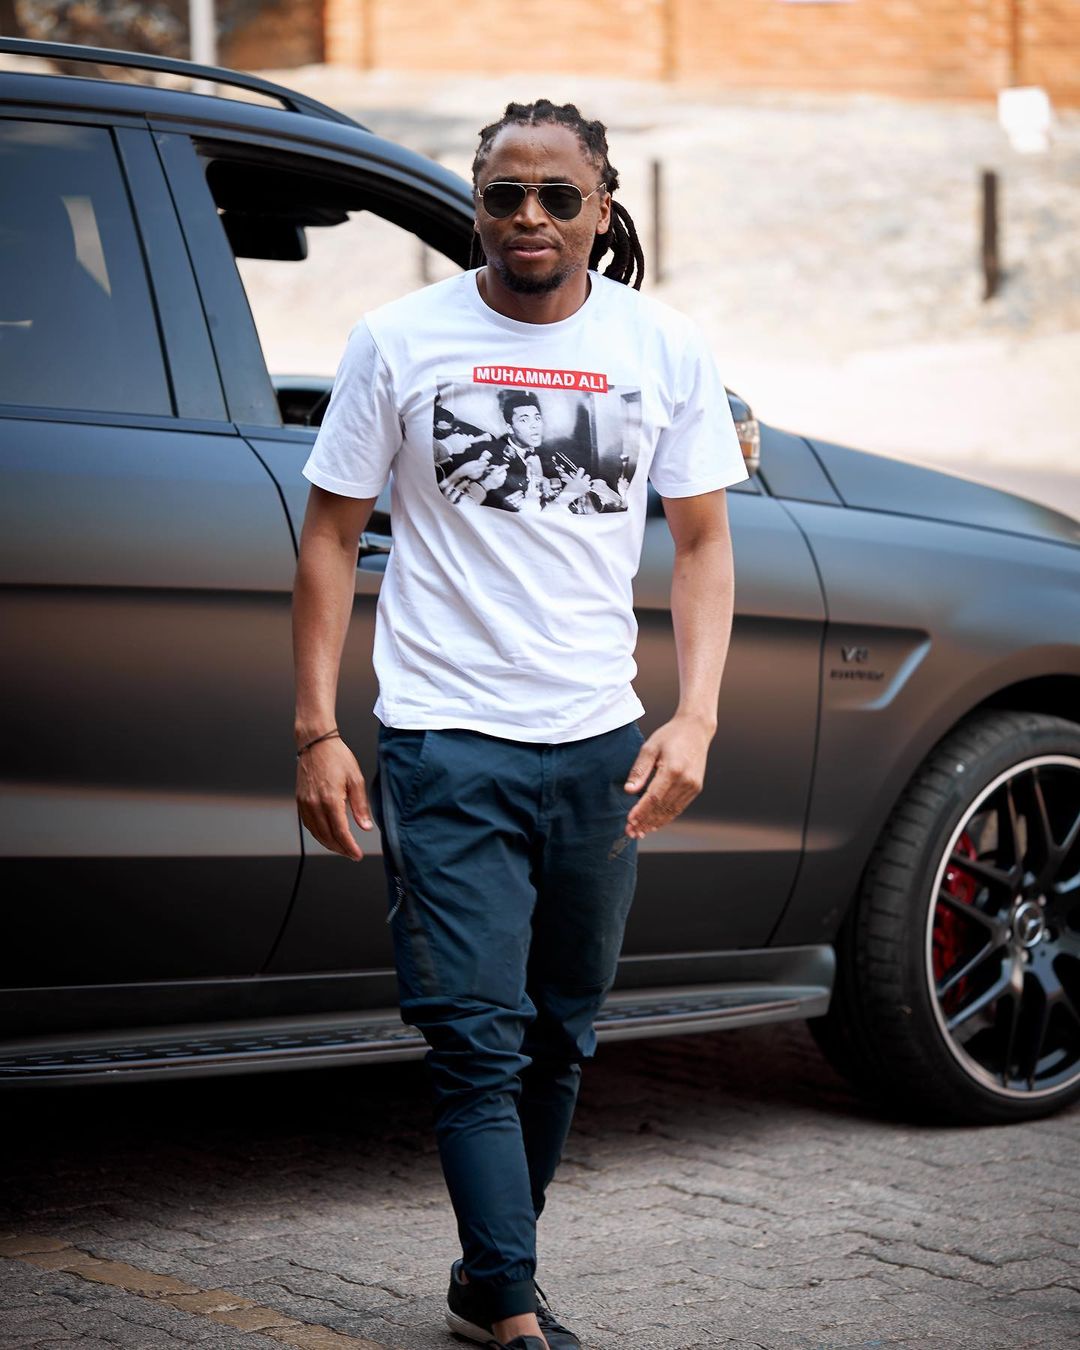 PICS: Check Out the Modifications Siphiwe Tshabalala Has Done on His Mercedes Benz! 